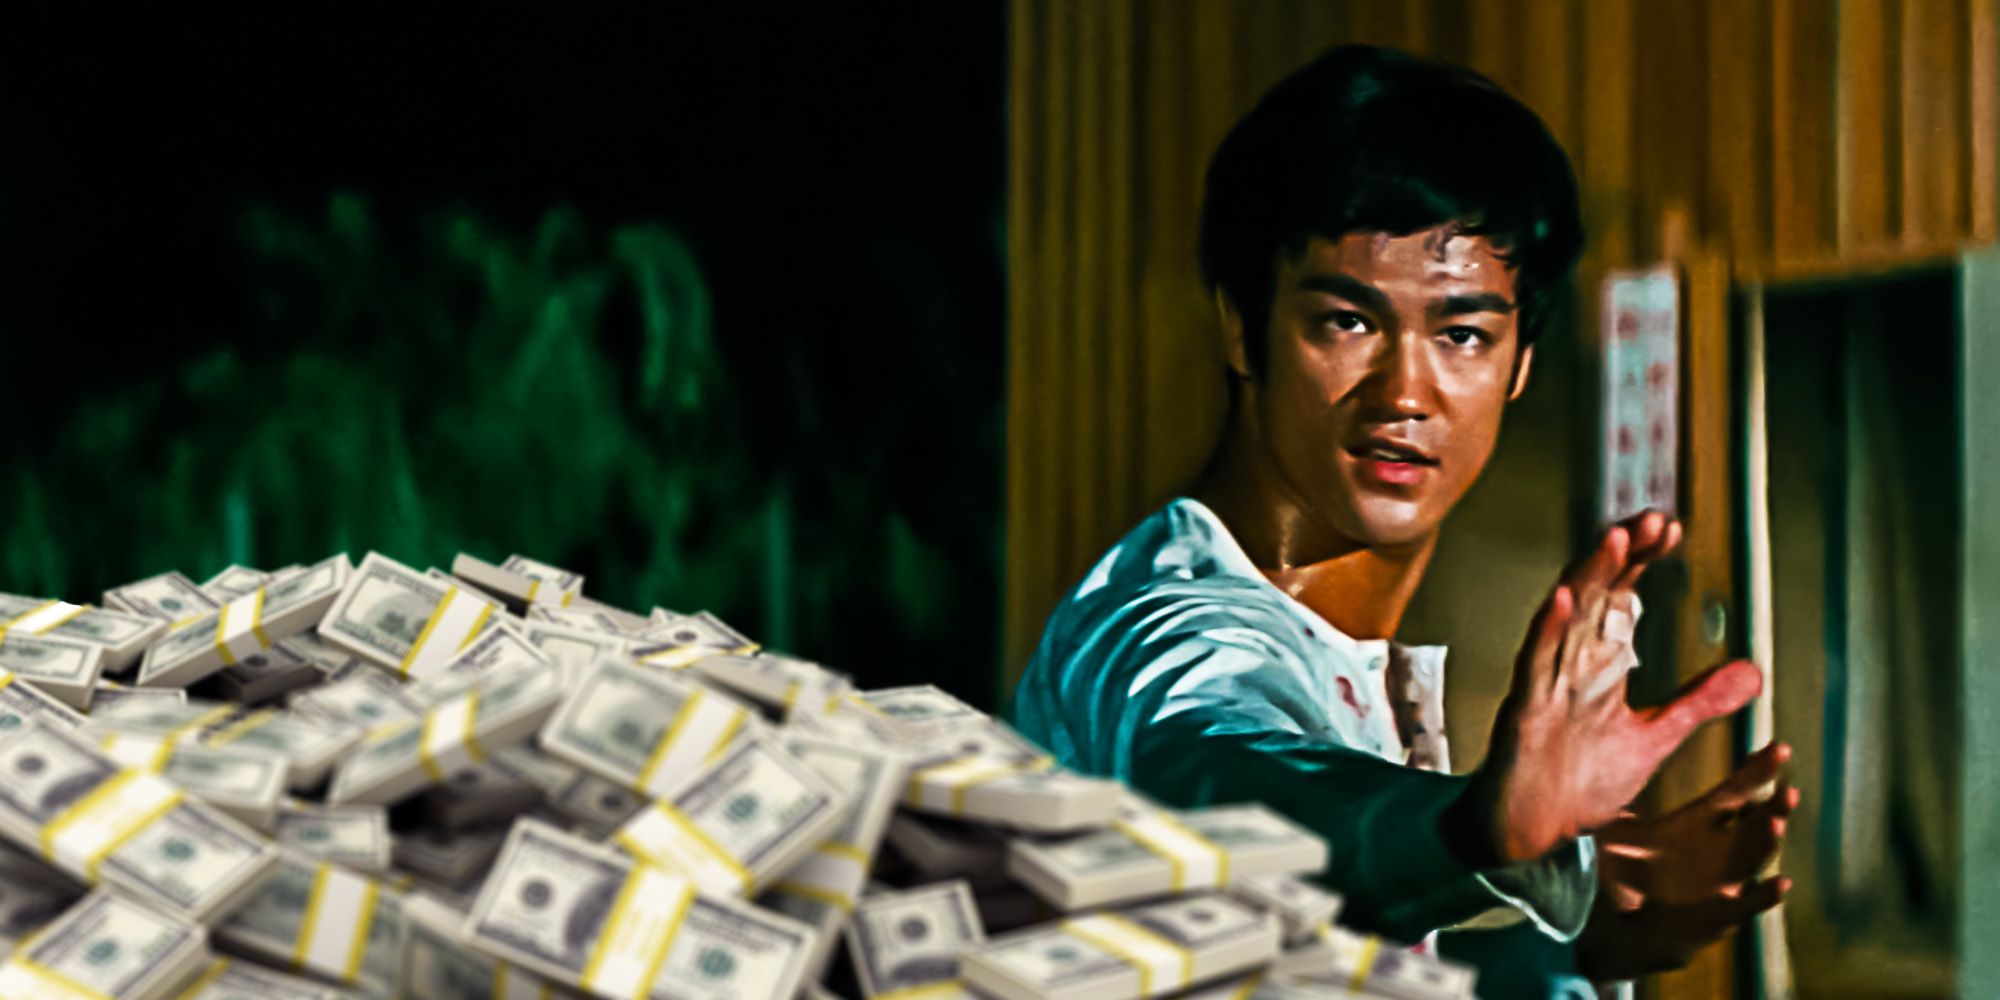 How much bruce lee got paid for his first kung fu movie the big boss